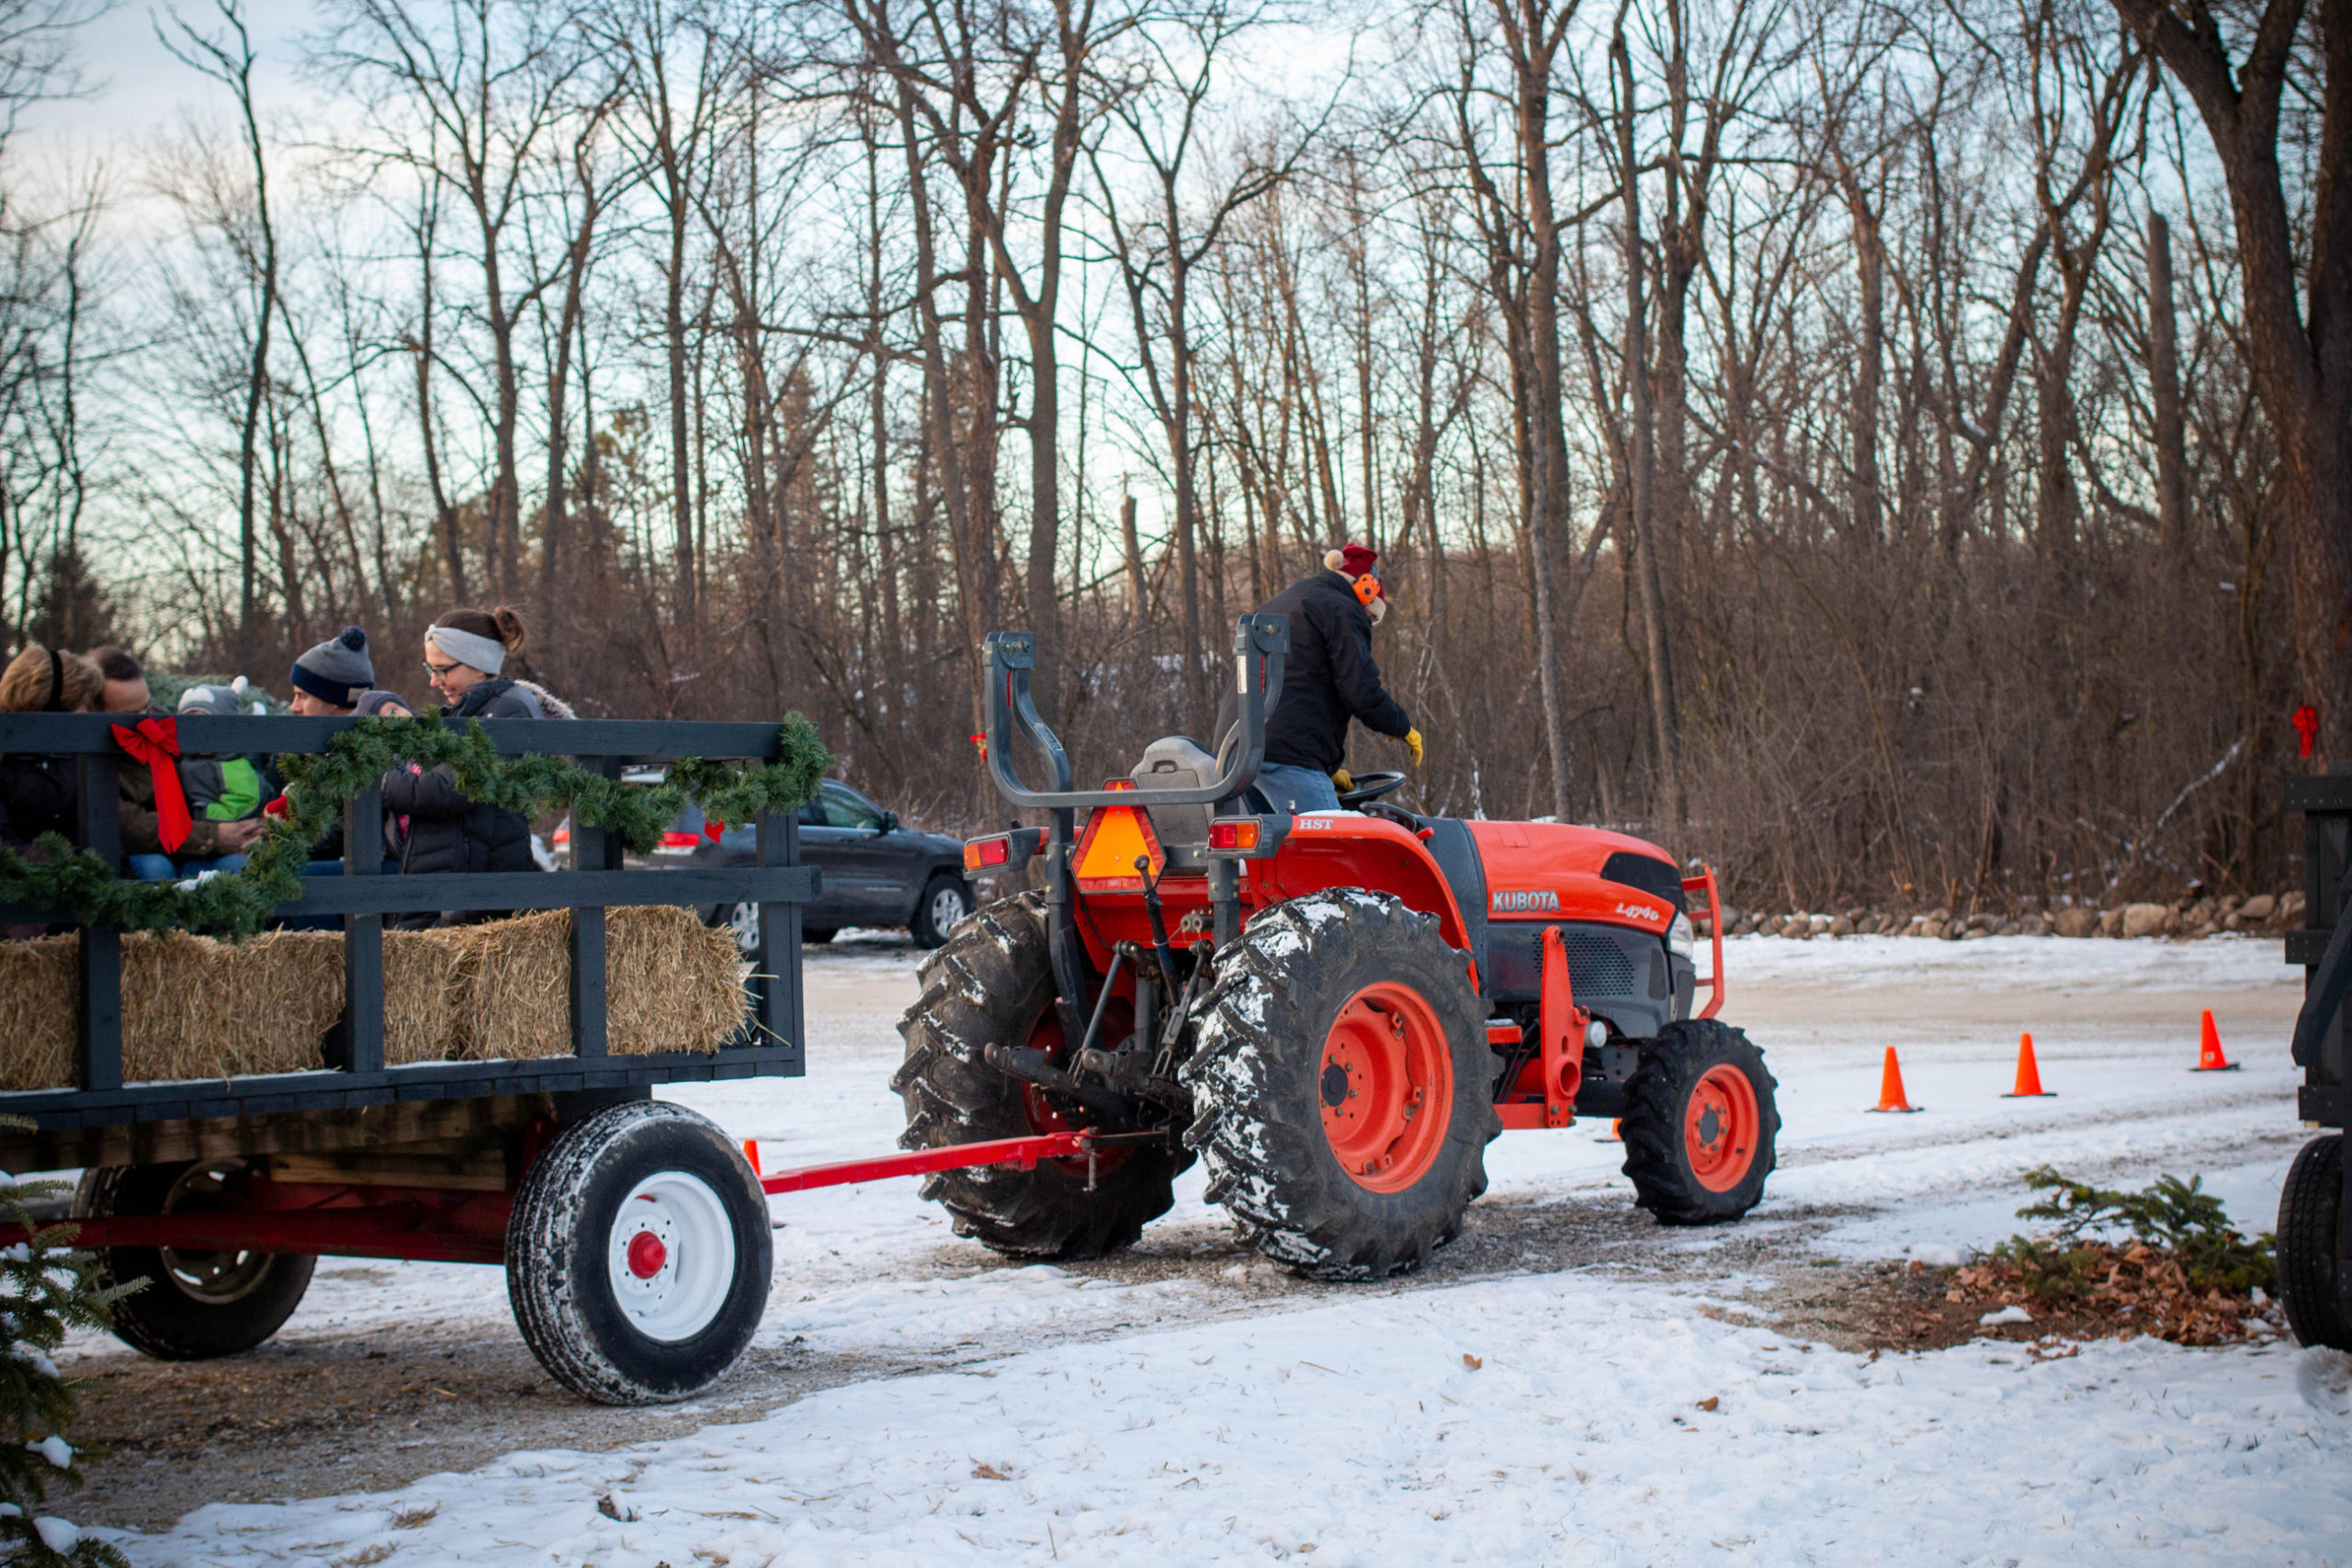 hay ride at Trees for Less in Mequon